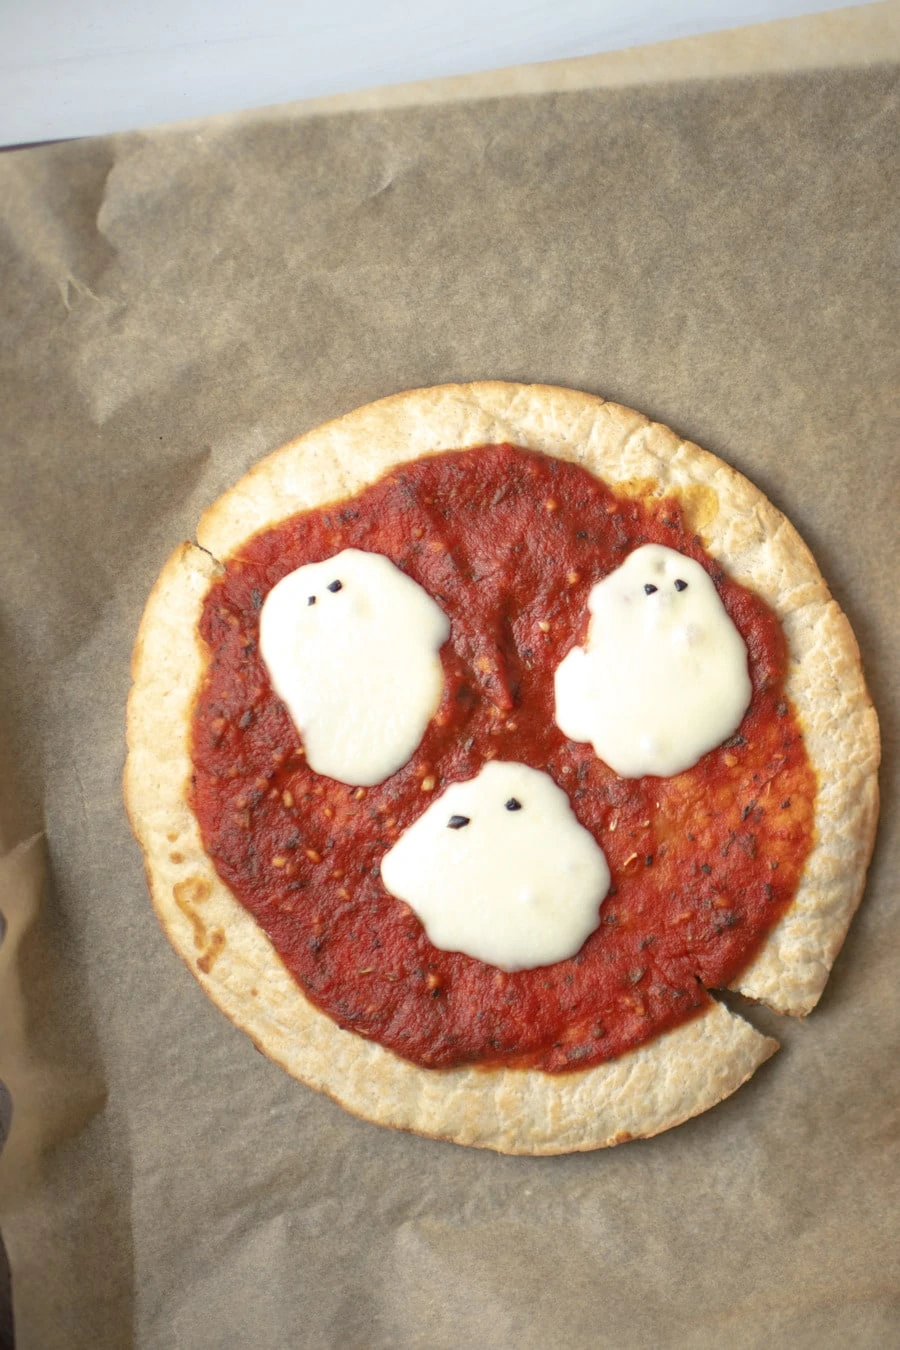 Cute ghost pizza made with white cheese and pizza crusts